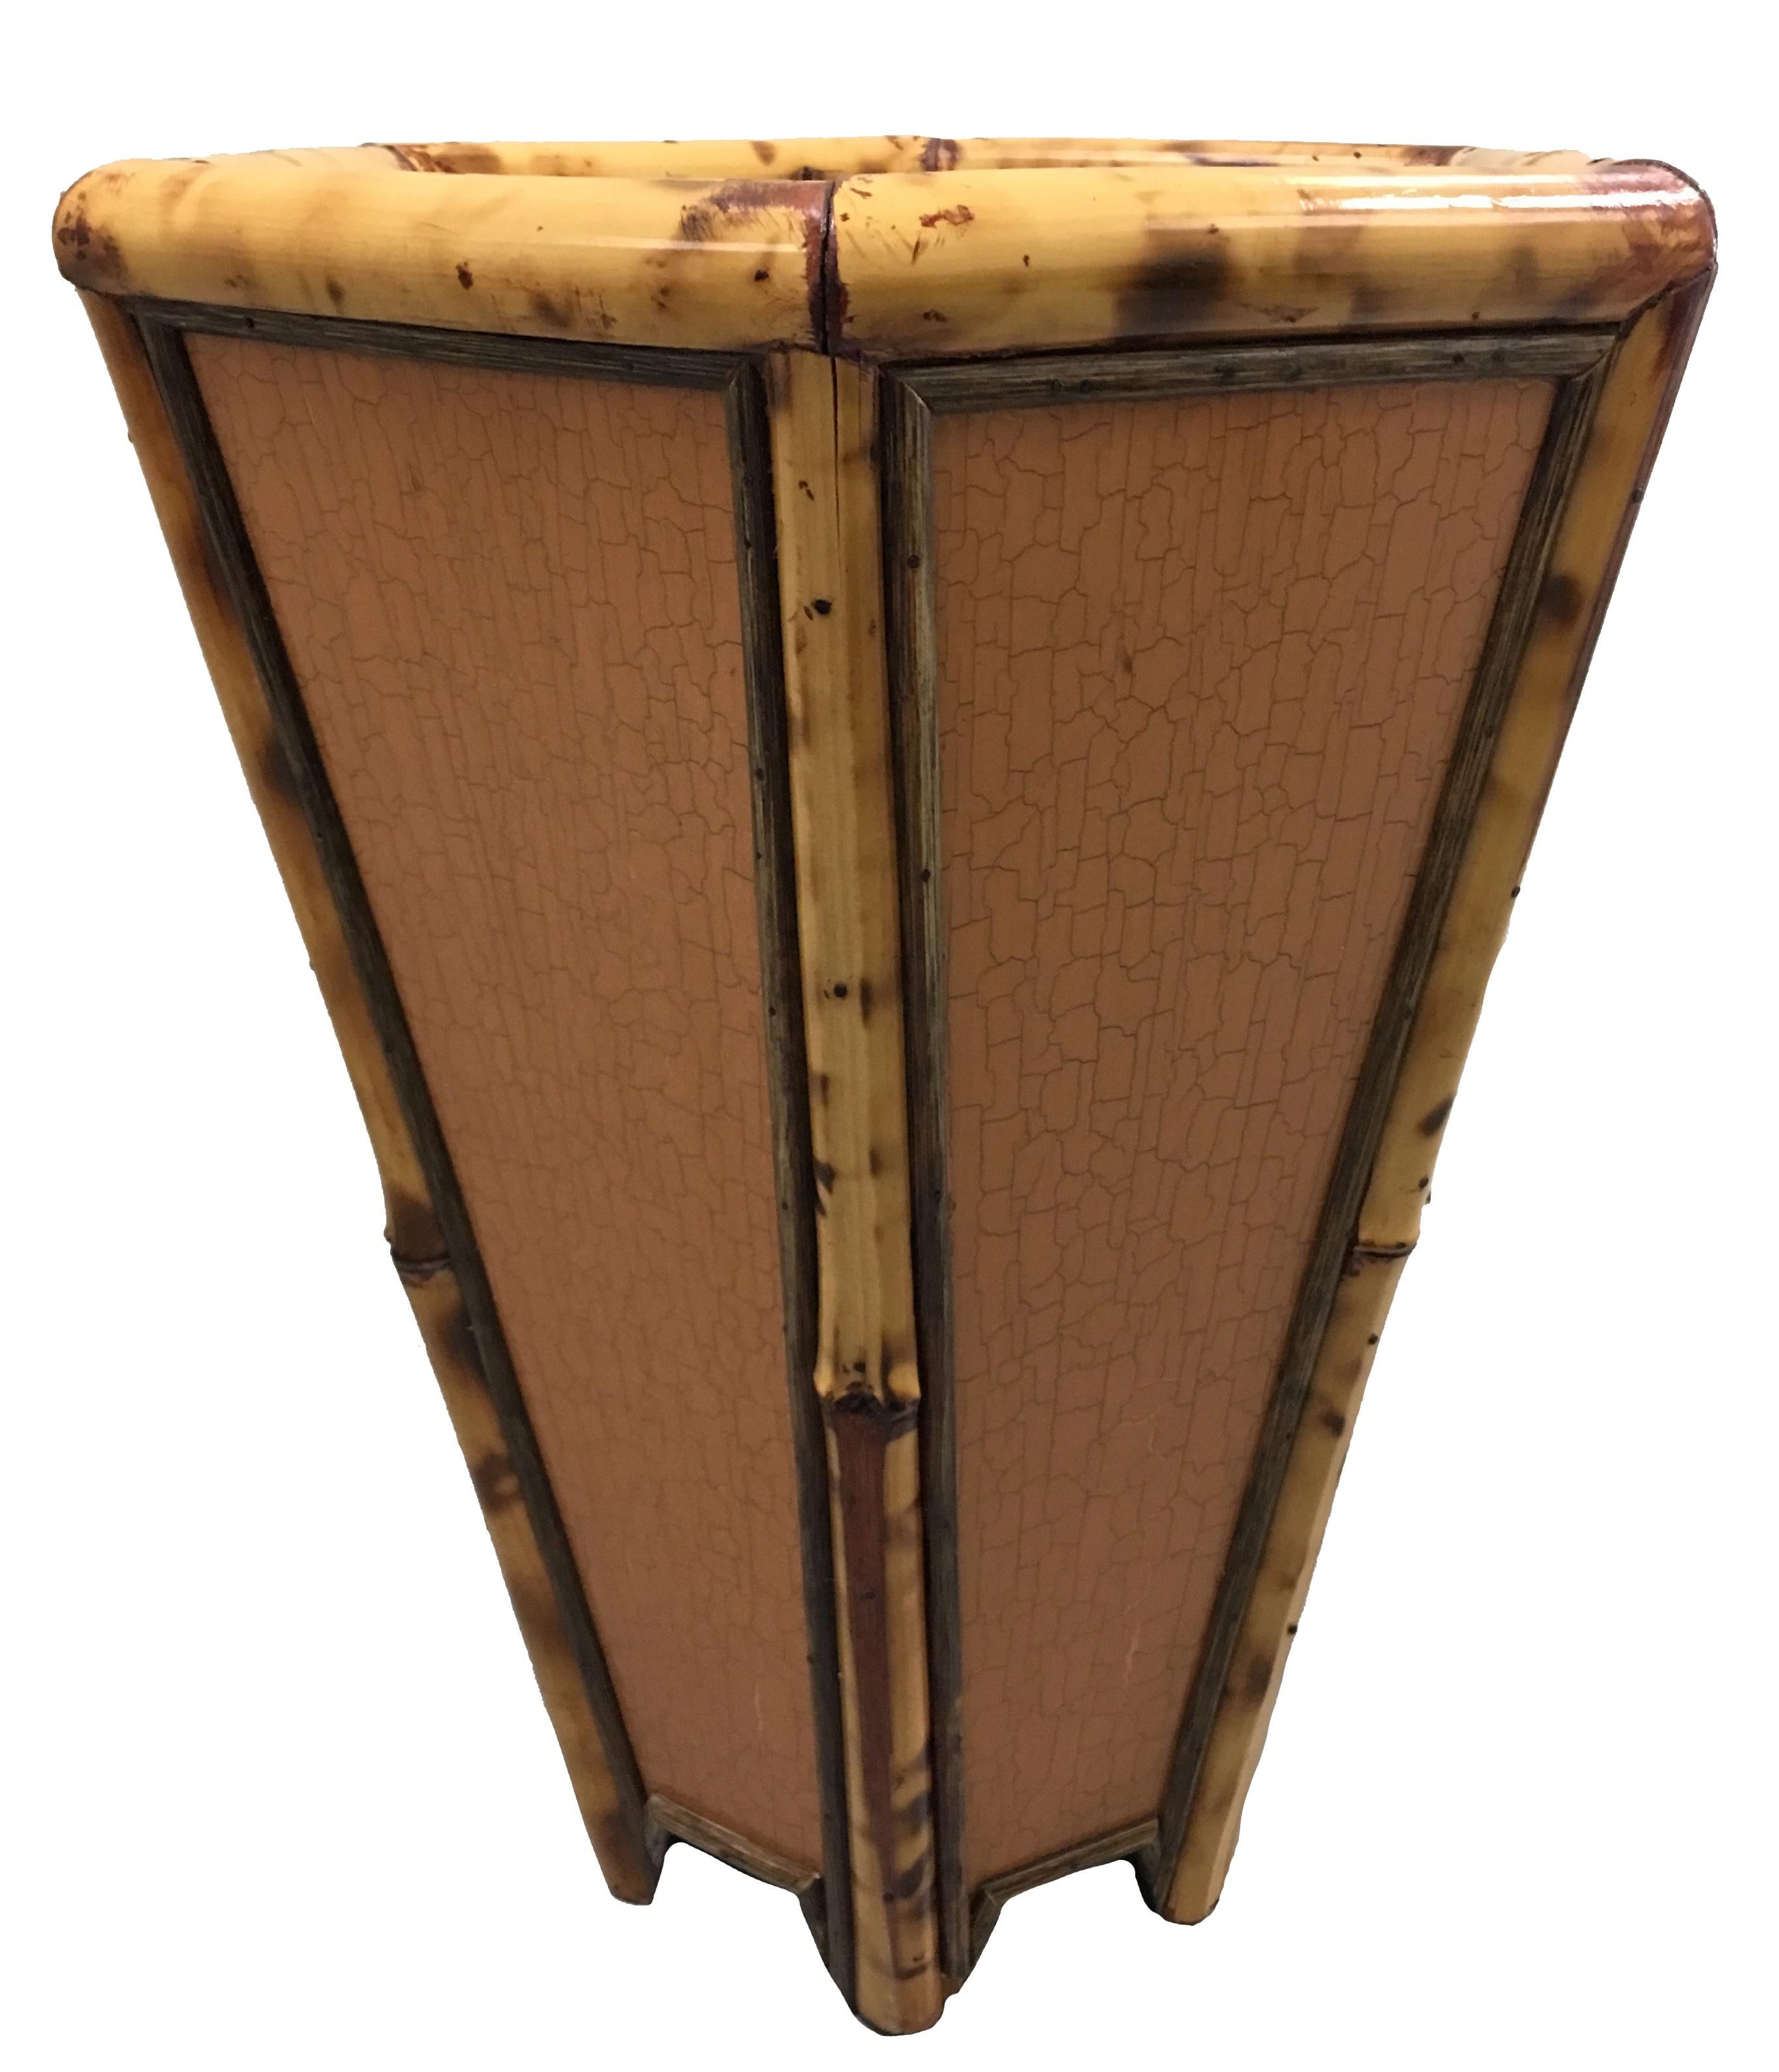 1970s burnt bamboo hexagonal umbrella stand. Very solid heavy design. Six panels with crackle finish trimmed with bamboo. Interior is black lacquer wood with all over design. No makers mark.